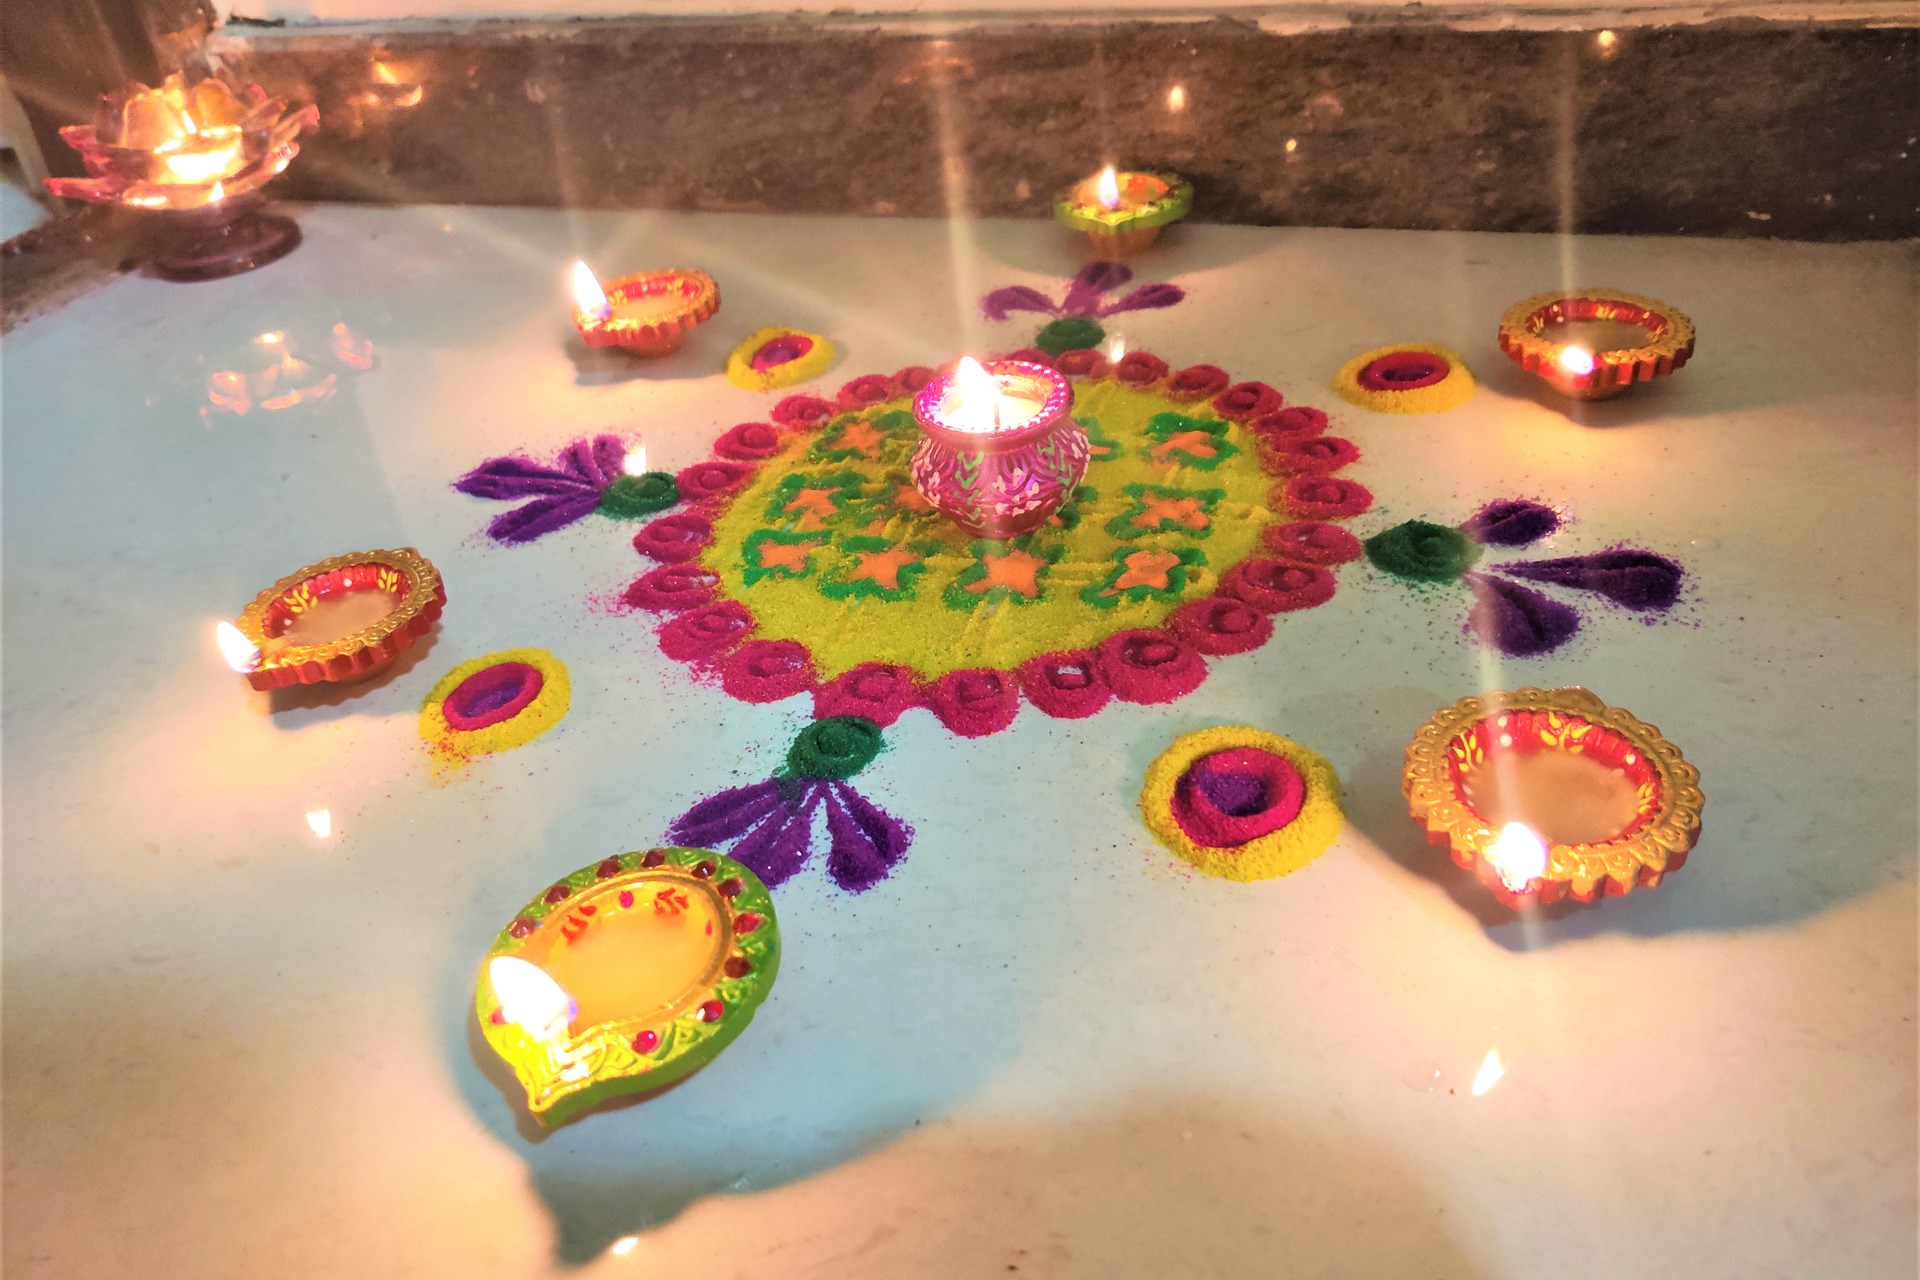 Rangoli is the art of decorating the house entrance for Diwali with colors and lights. The decorations welcome gods and guests alike. Sunita Nair´s message this year is ‘happiness’.